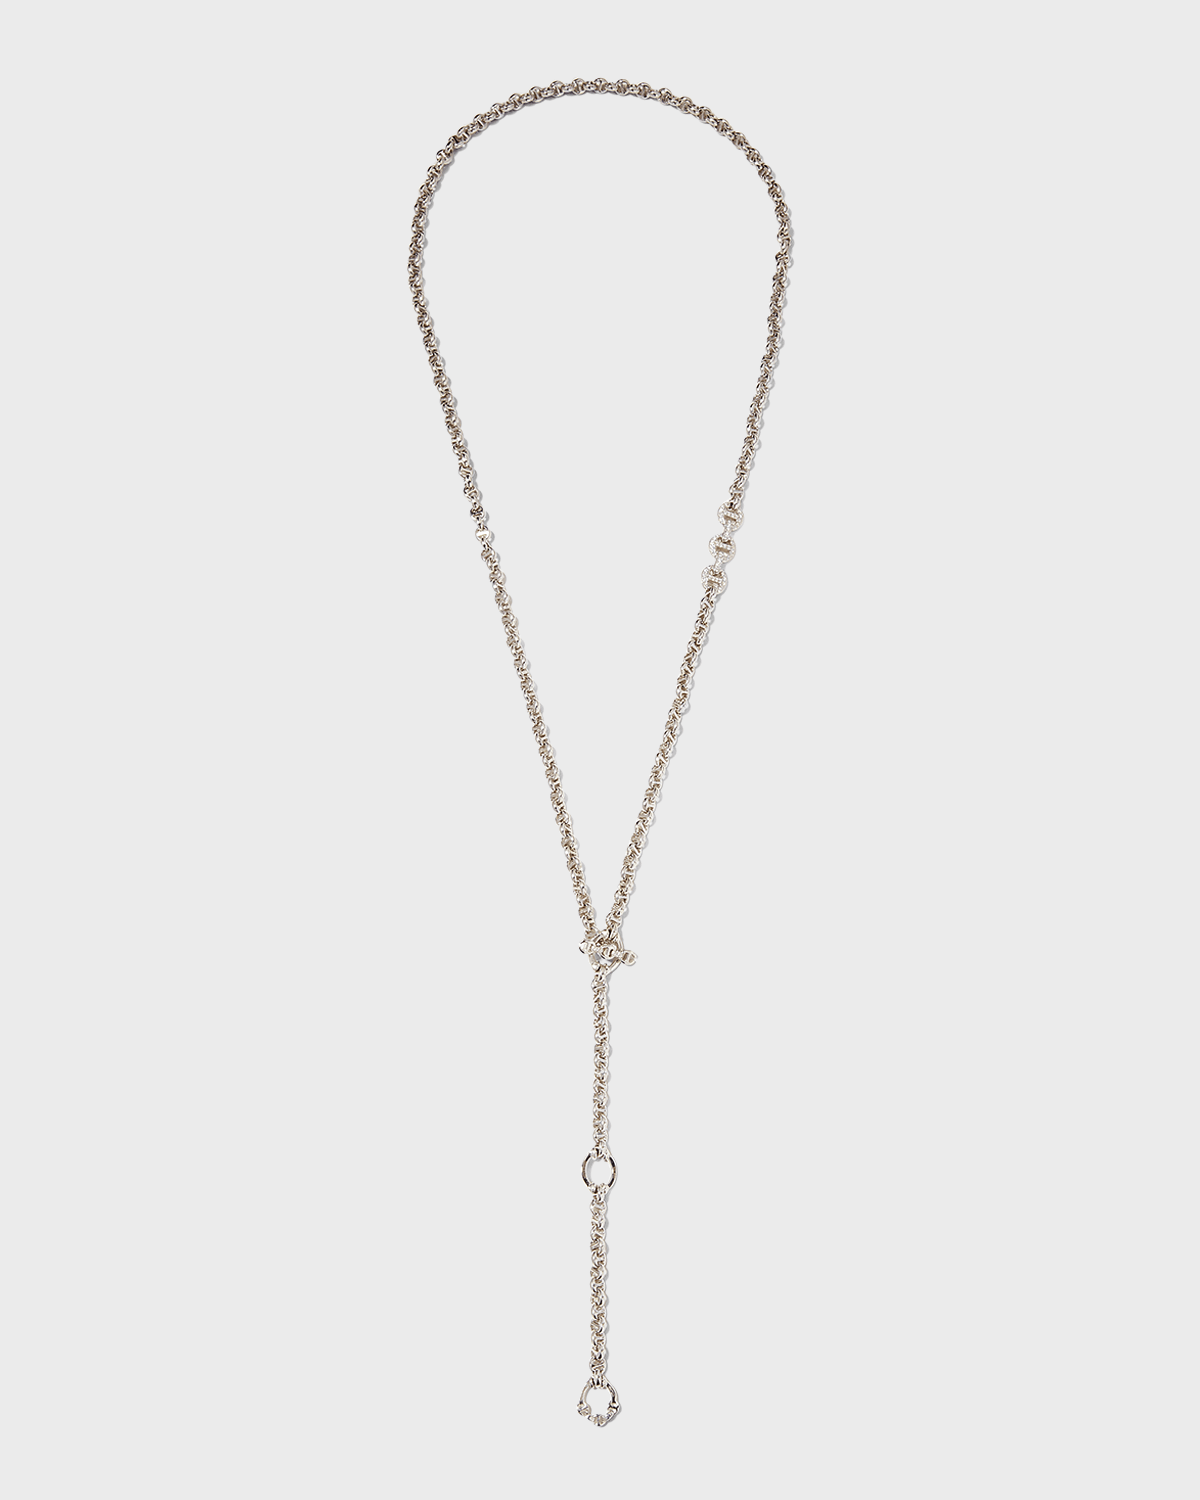 5mm Open-Link Necklace in 18K White Gold with Diamonds